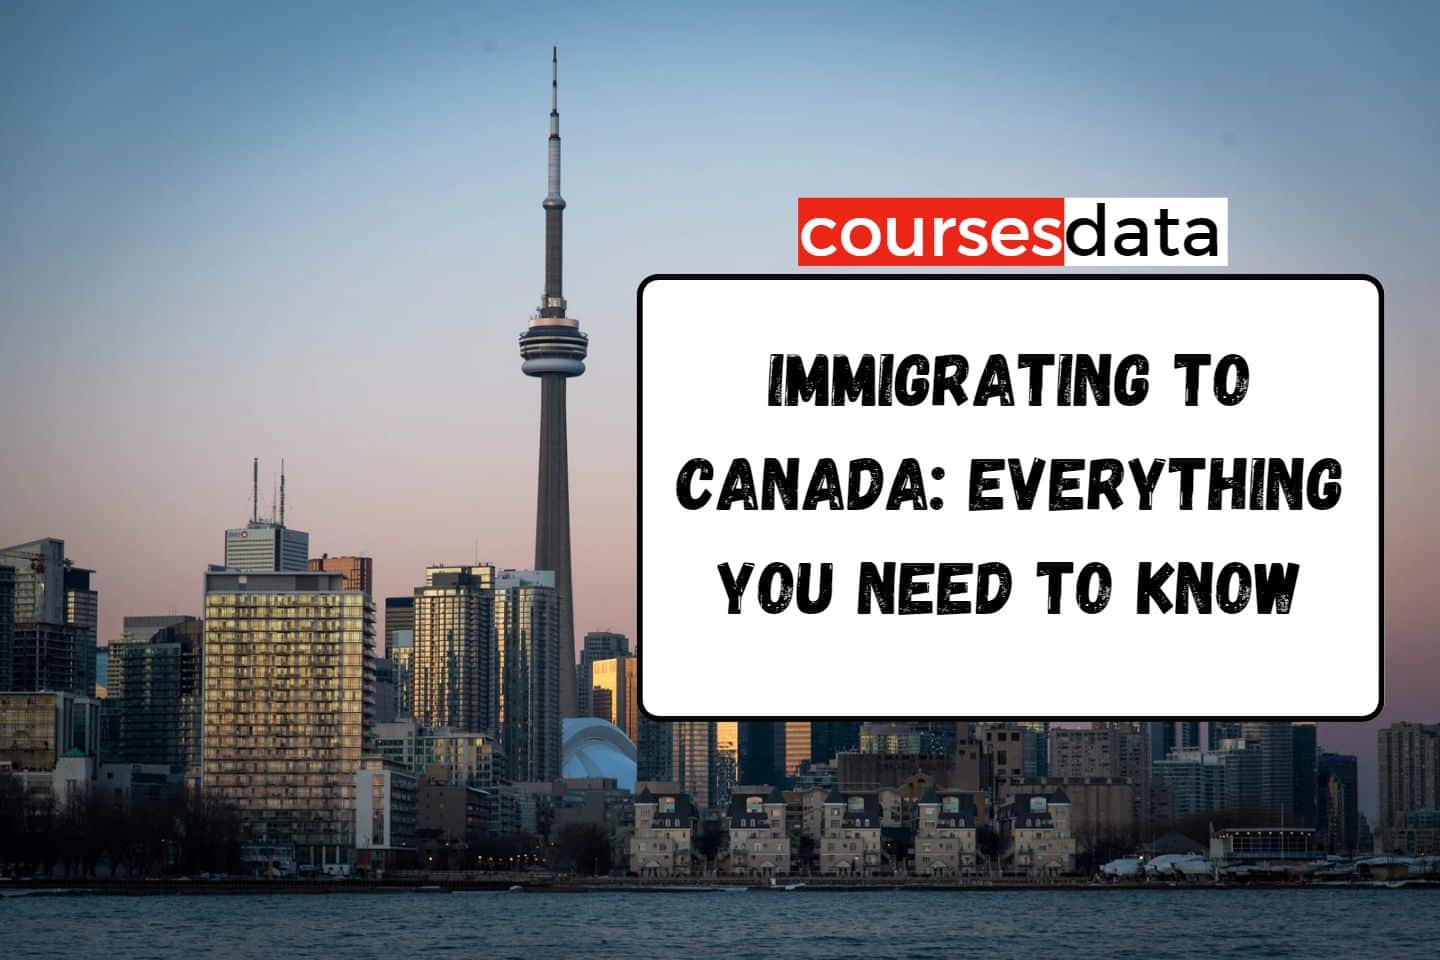 The Ultimate Guide to Immigrating to Canada: Every Opportunity You Need to Know